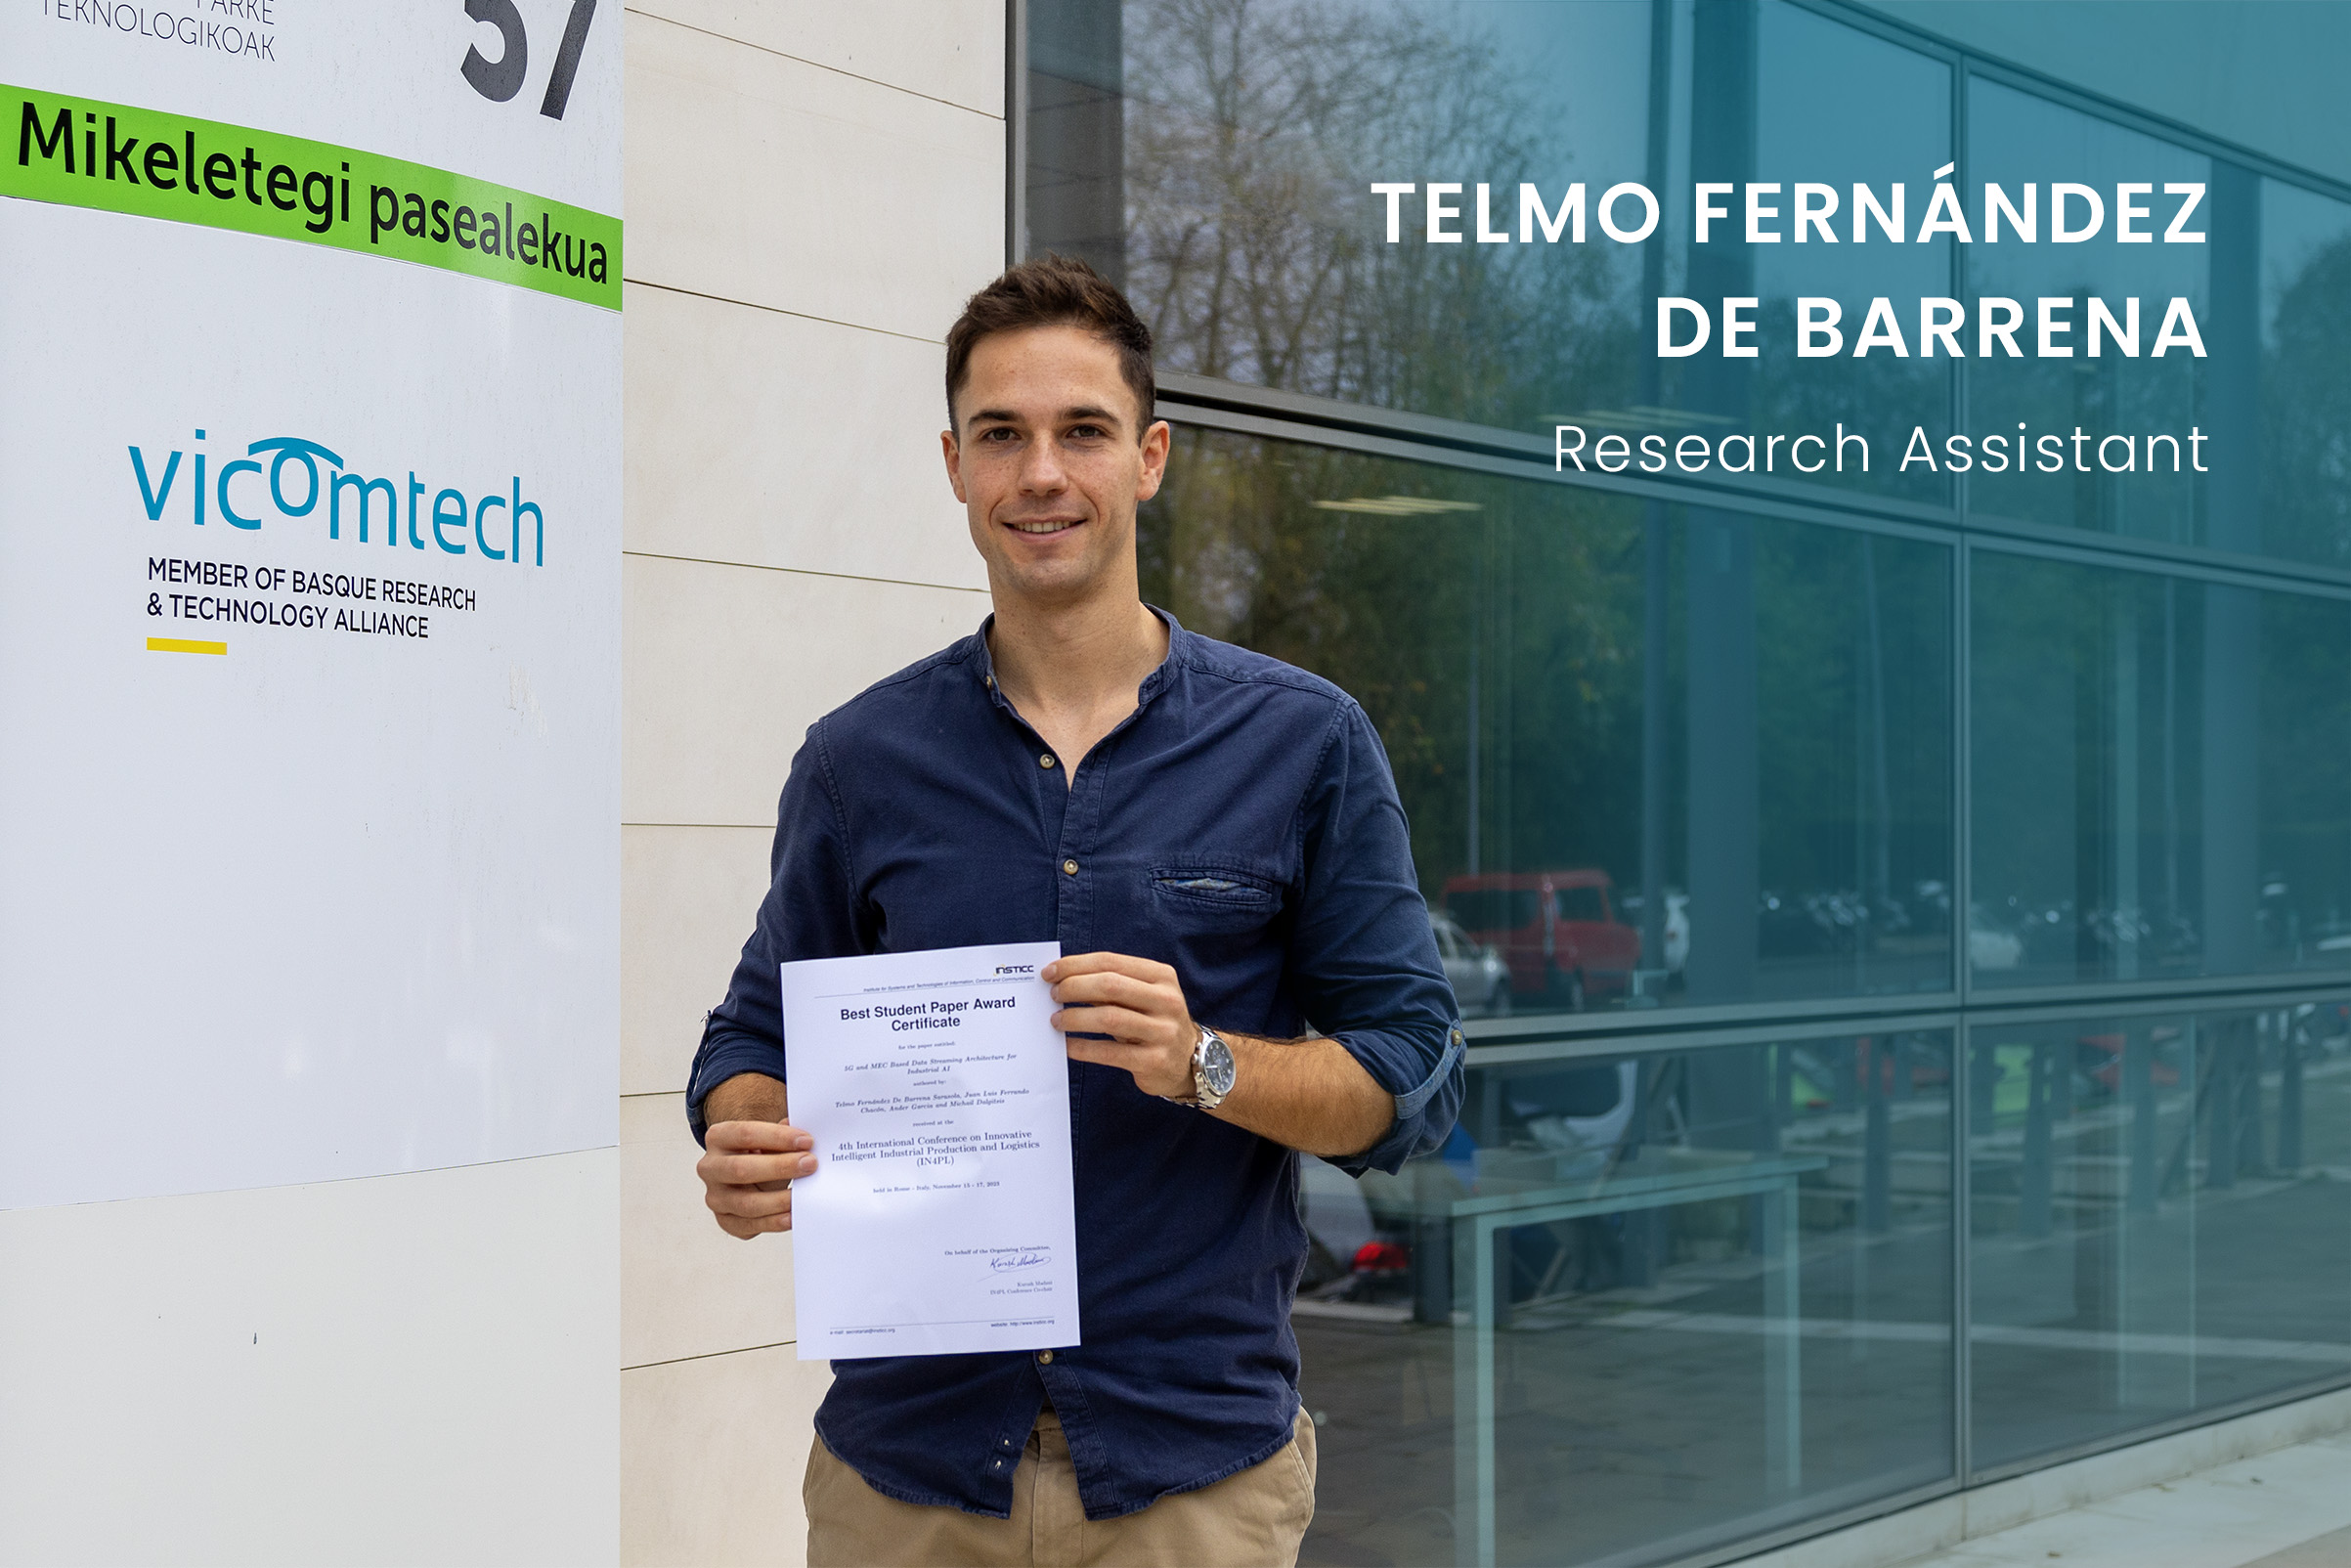 Telmo Fernández De Barrena receives the Best Student Paper Award at the conference “Innovative Intelligent Industrial Production and Logistics” 2023